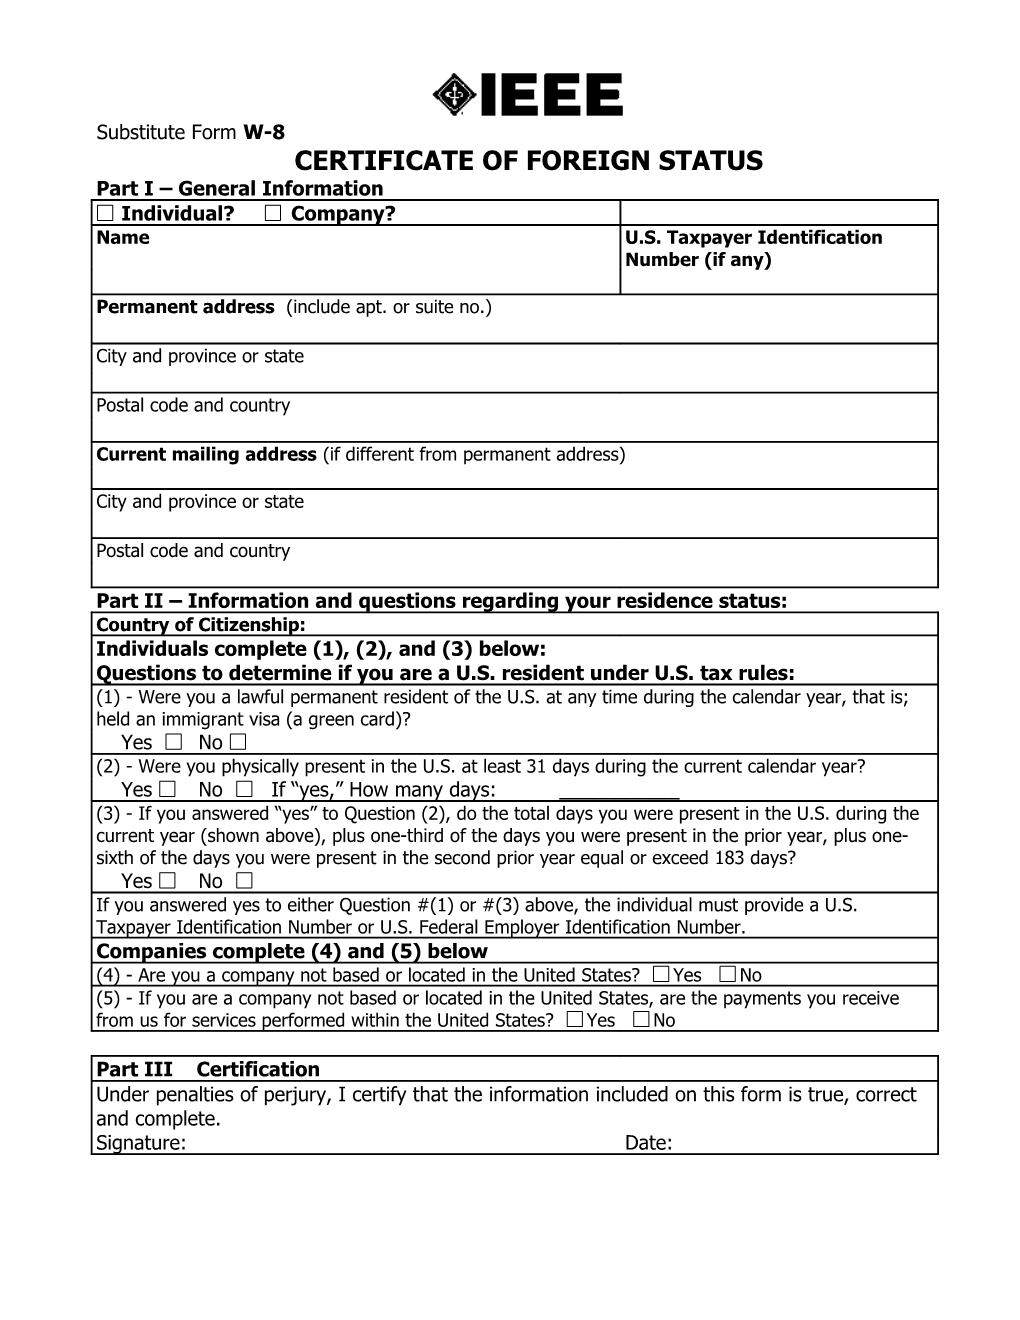 Certificate of Foreign Status